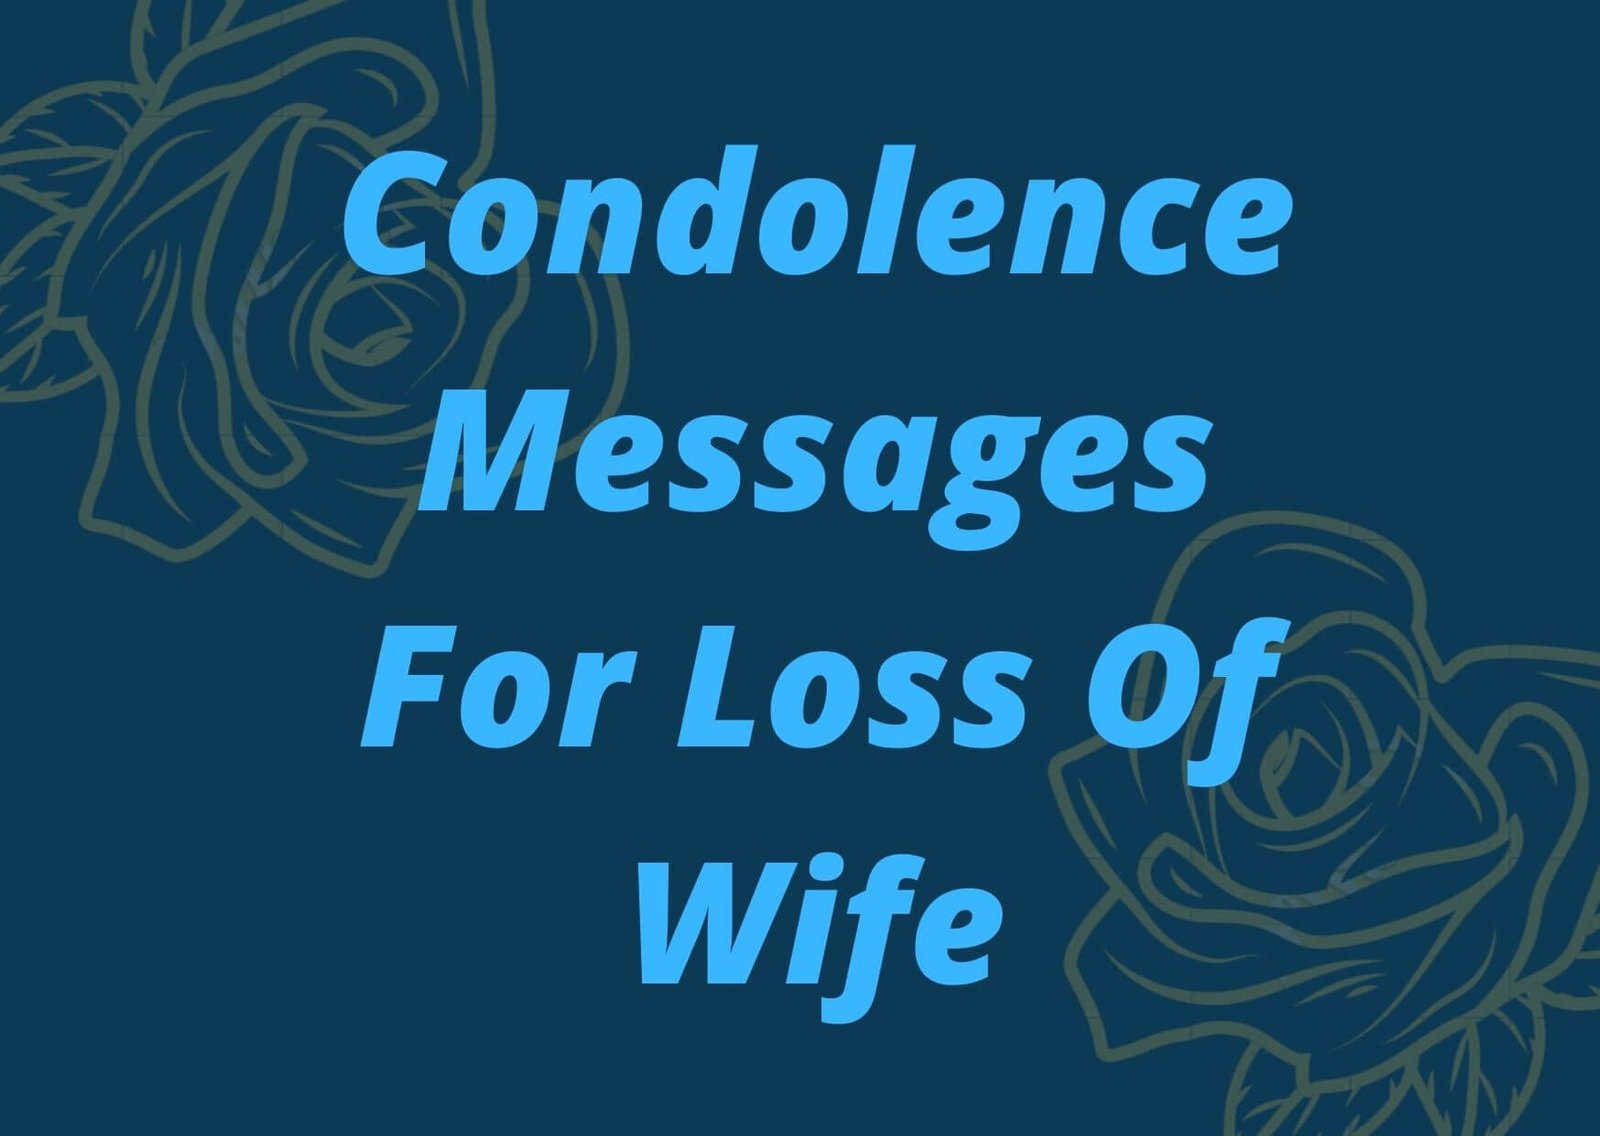 Condolence Messages for Loss of Wife